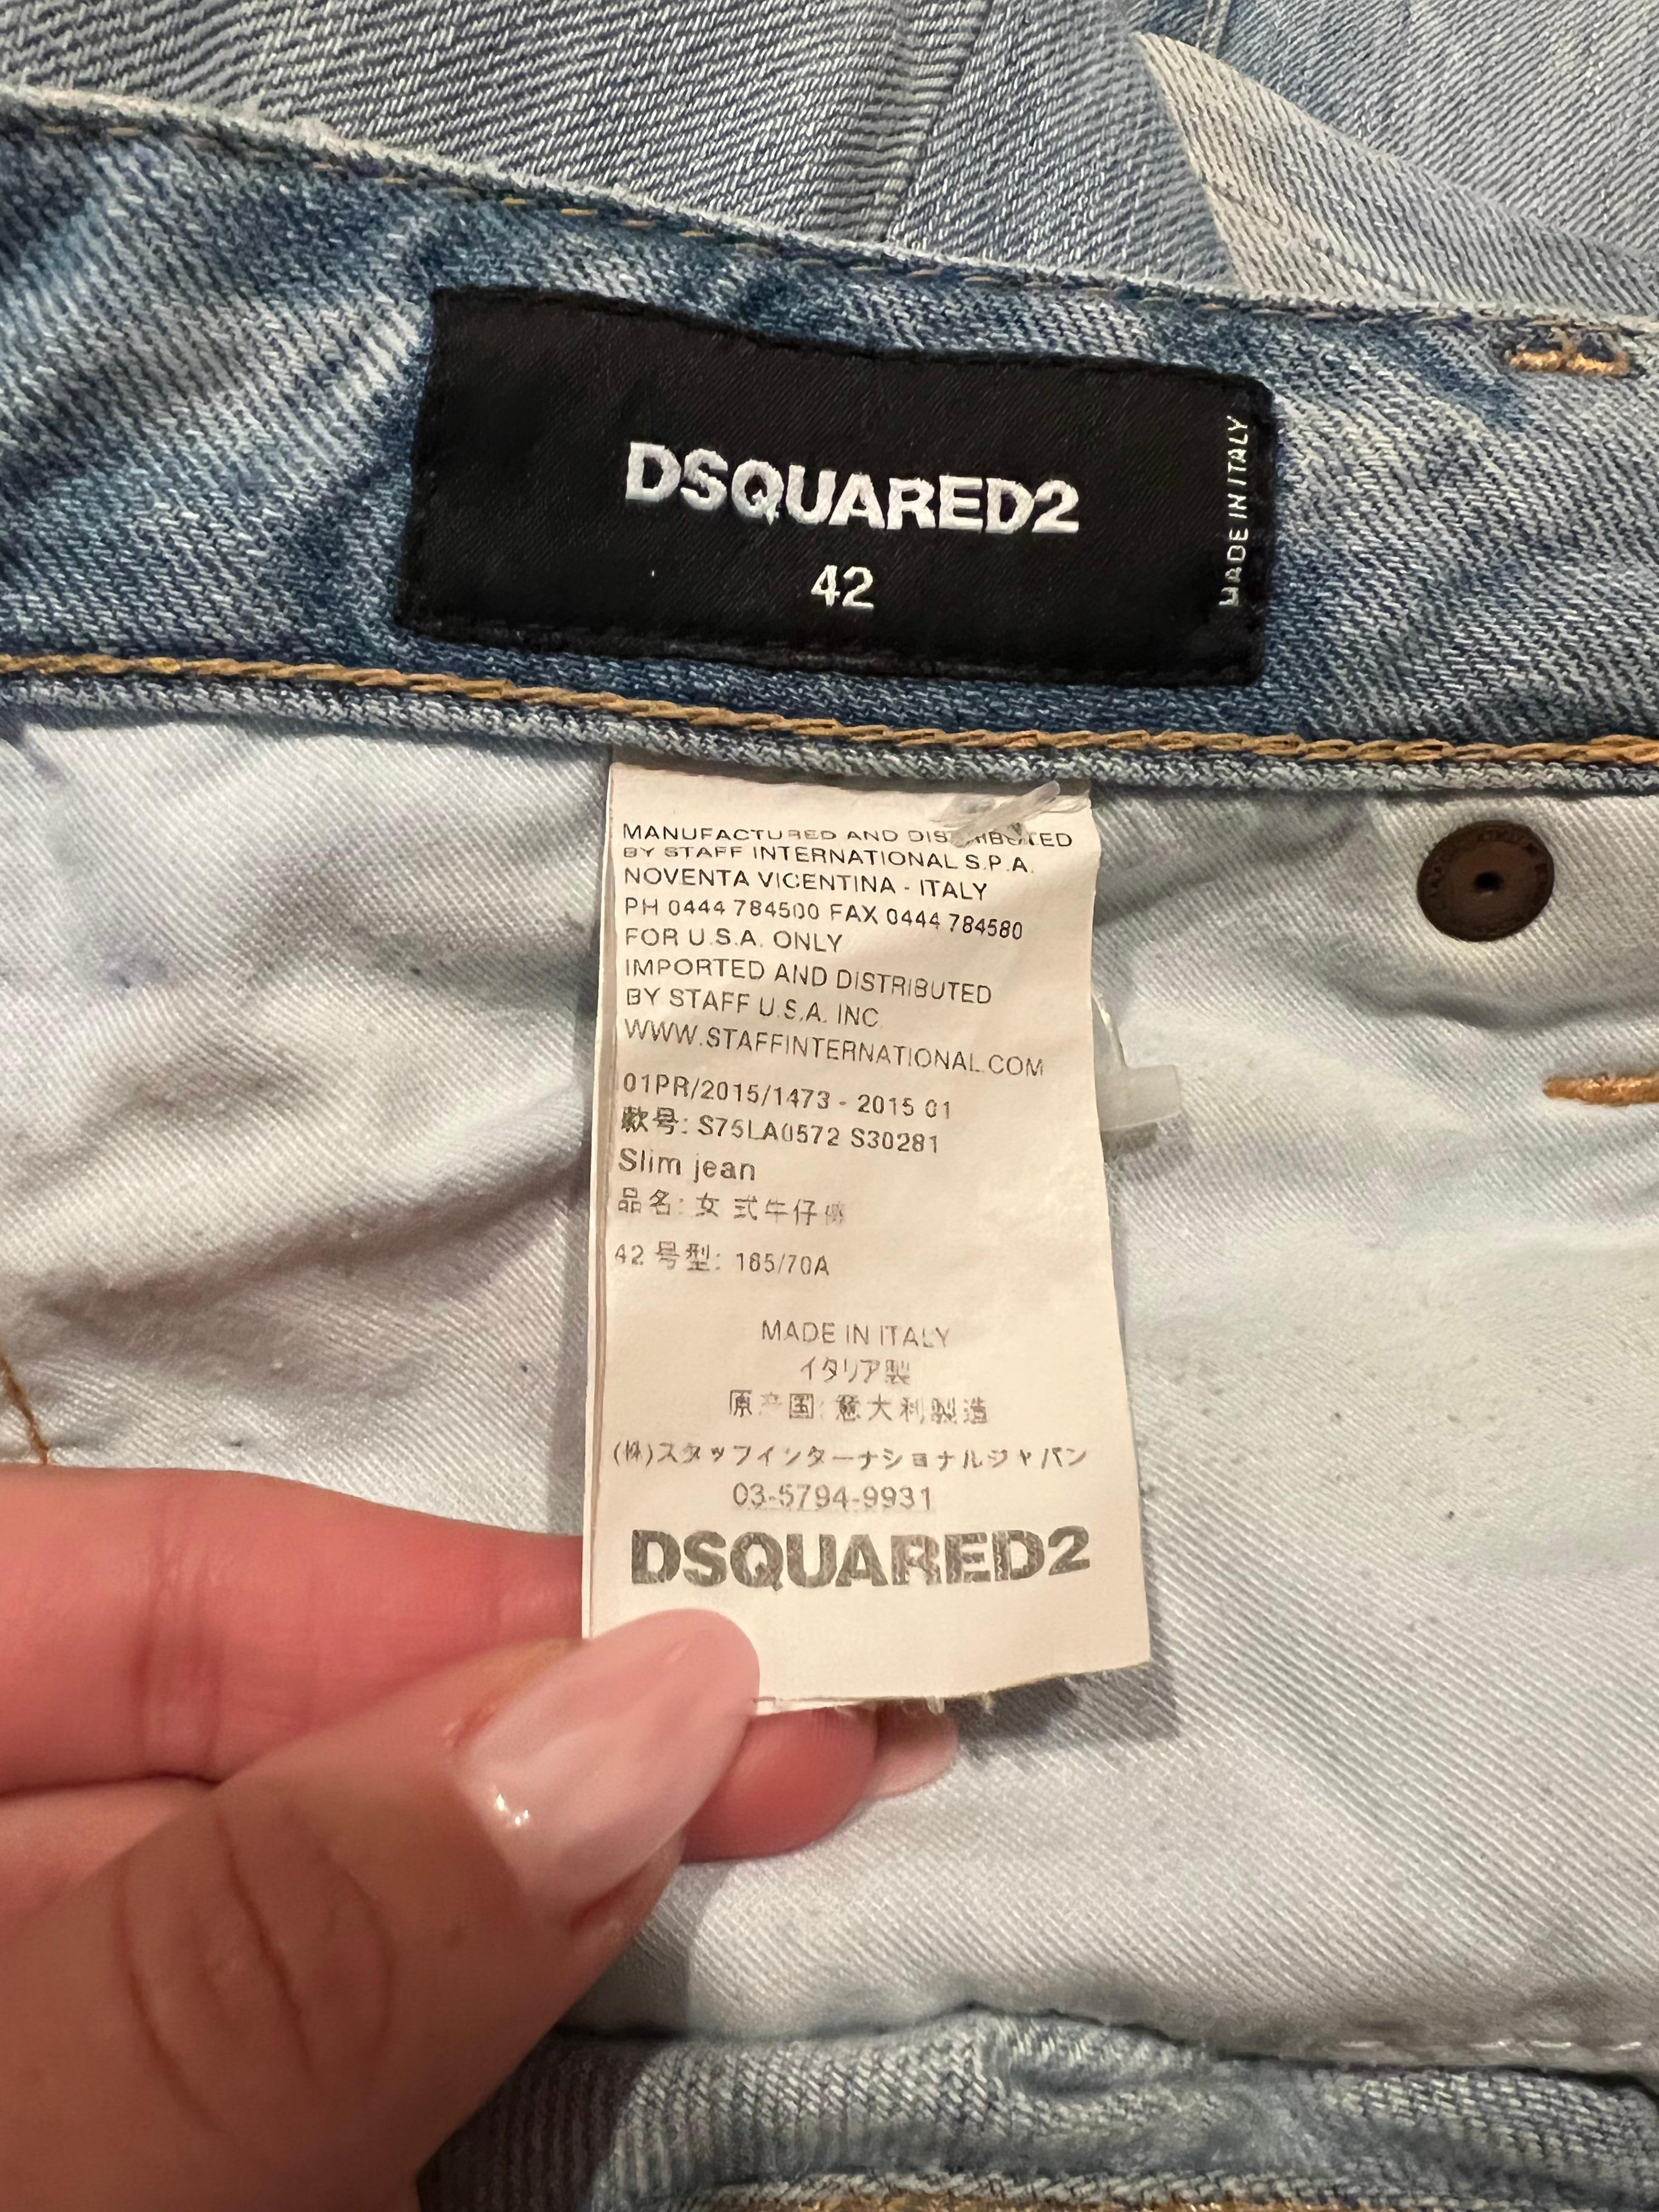 DSQUARED2 Light Blue Denim Jeans, Size 42 In Excellent Condition For Sale In Beverly Hills, CA